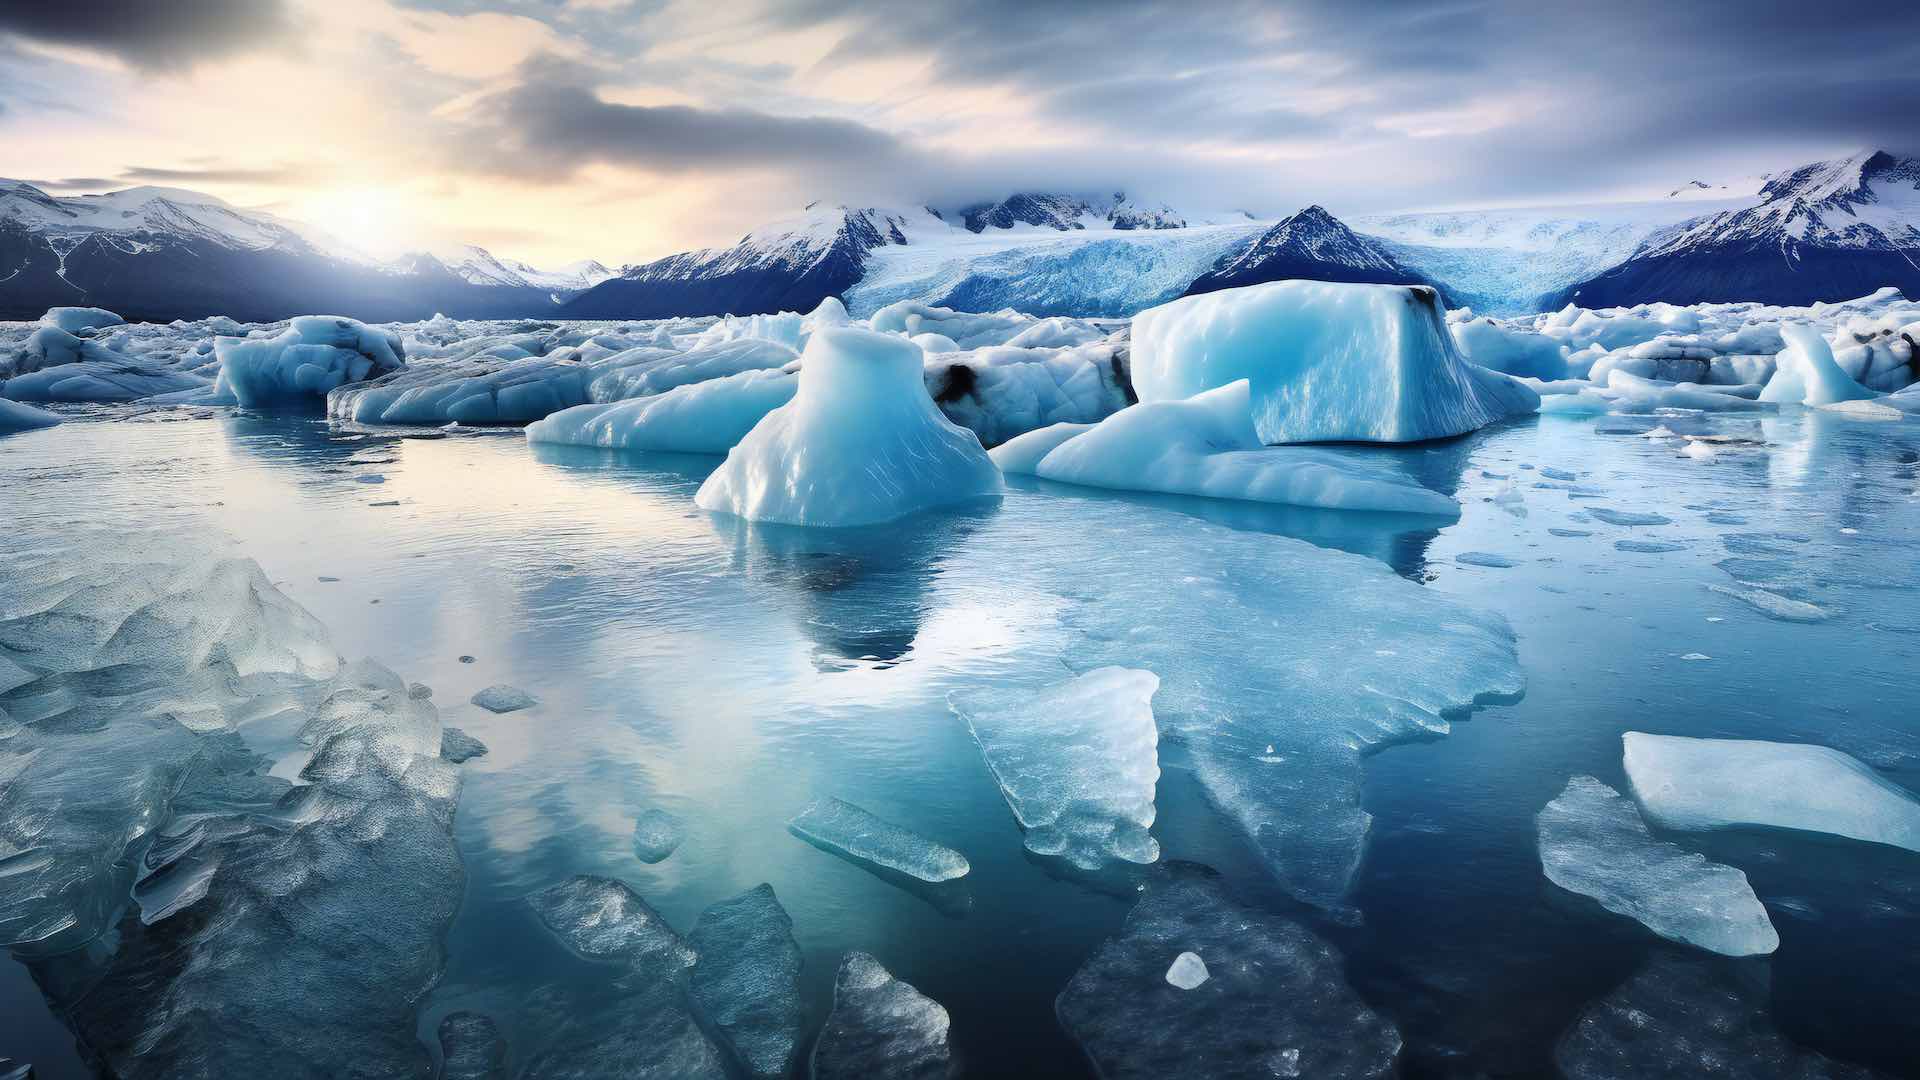 Greenland's ice sheet melting 20% faster, says study